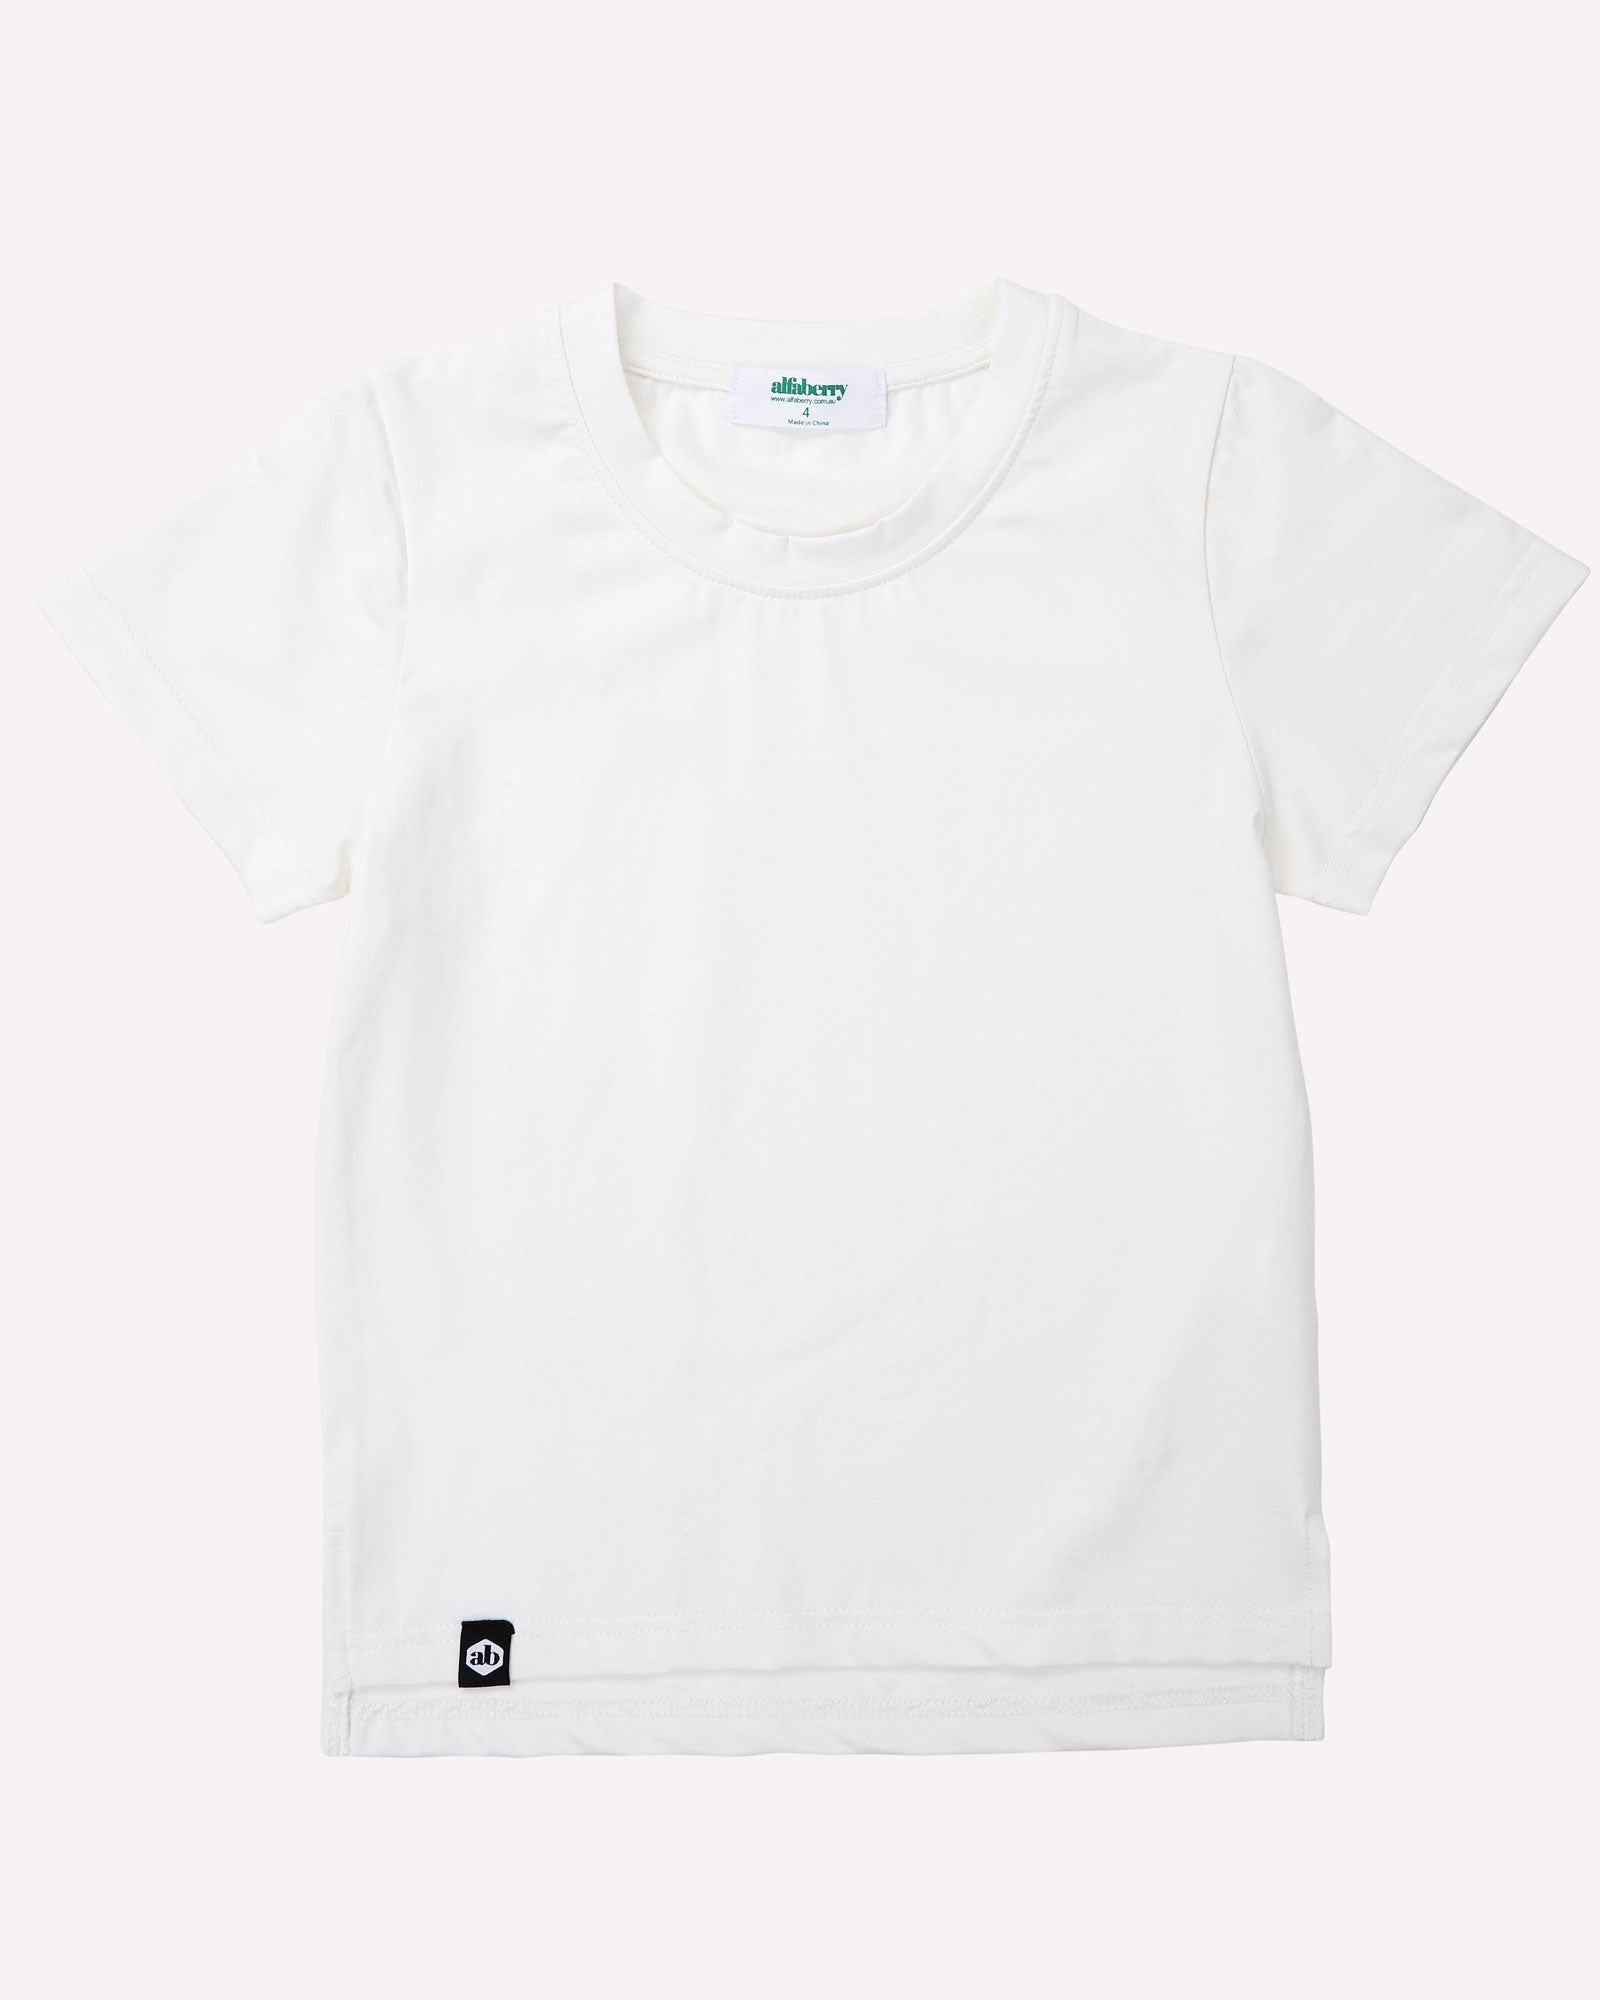 Buddy Tall Tee In Ivory Front